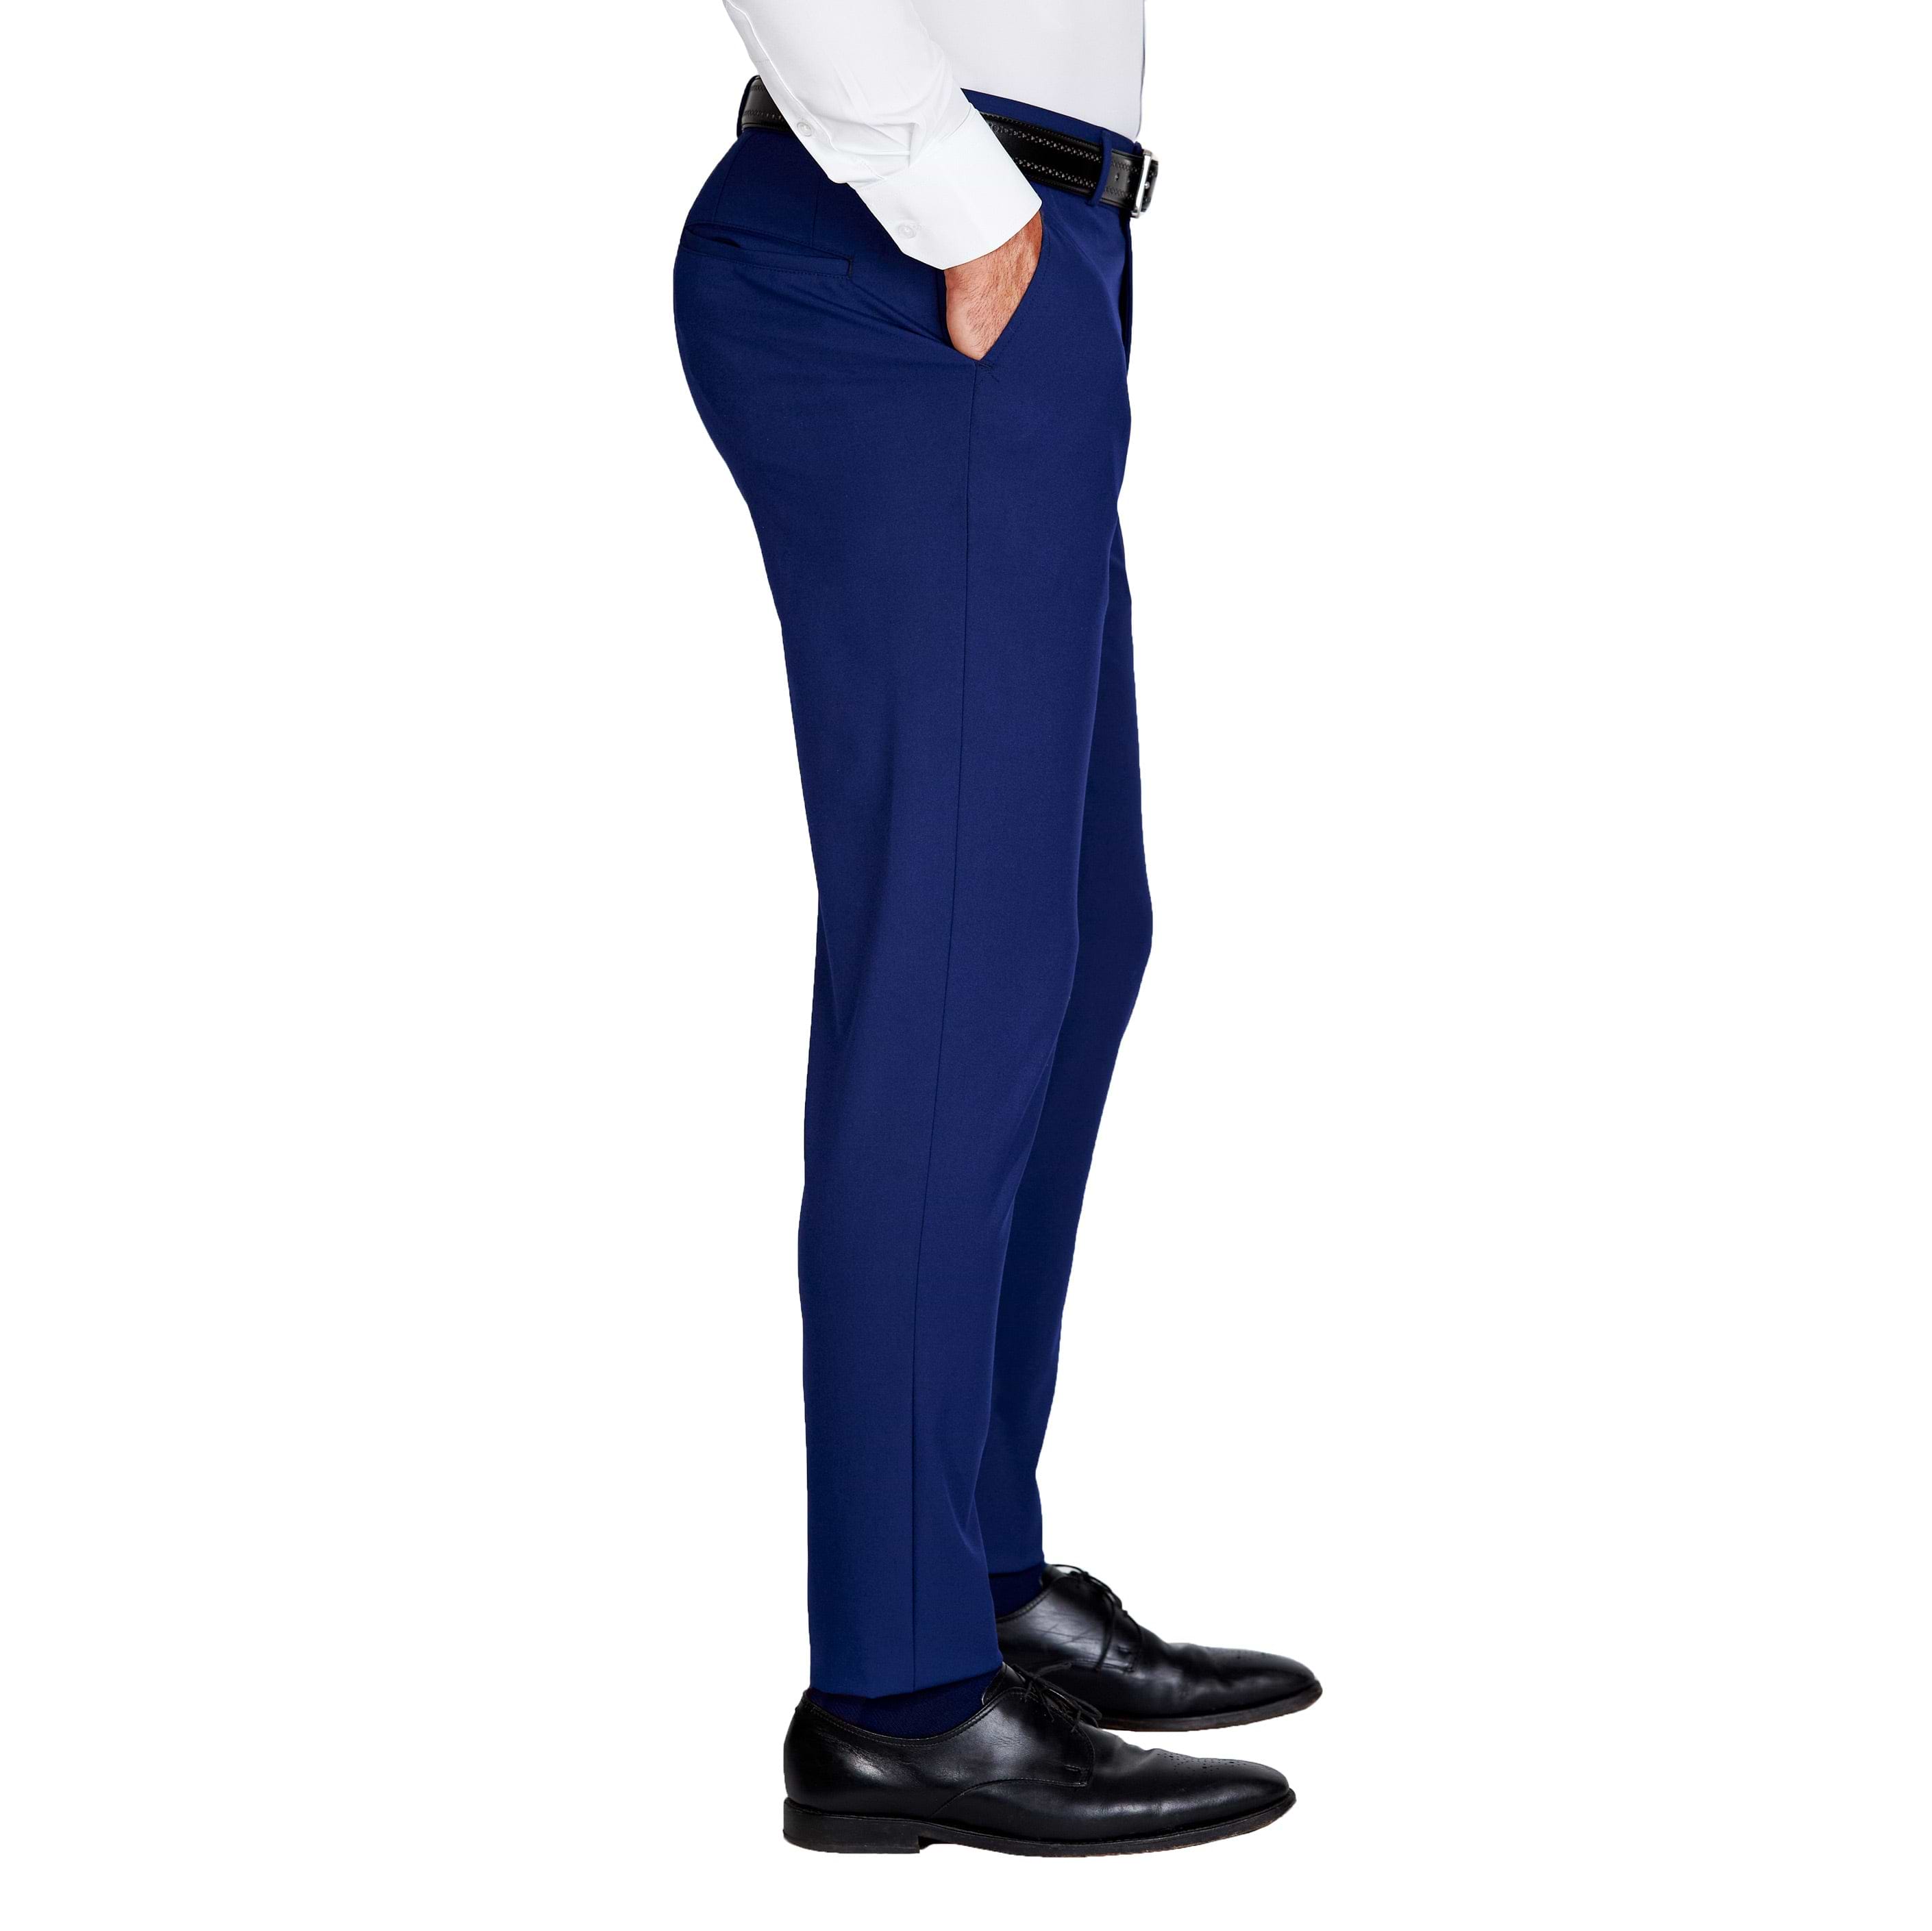 Spring Summer Business Dress Pants Men Solid Color Office Social Formal  Suit Pants Casual Streetwear Trousers Homme D111 Color: royal blue, Size:  33 | Uquid shopping cart: Online shopping with crypto currencies